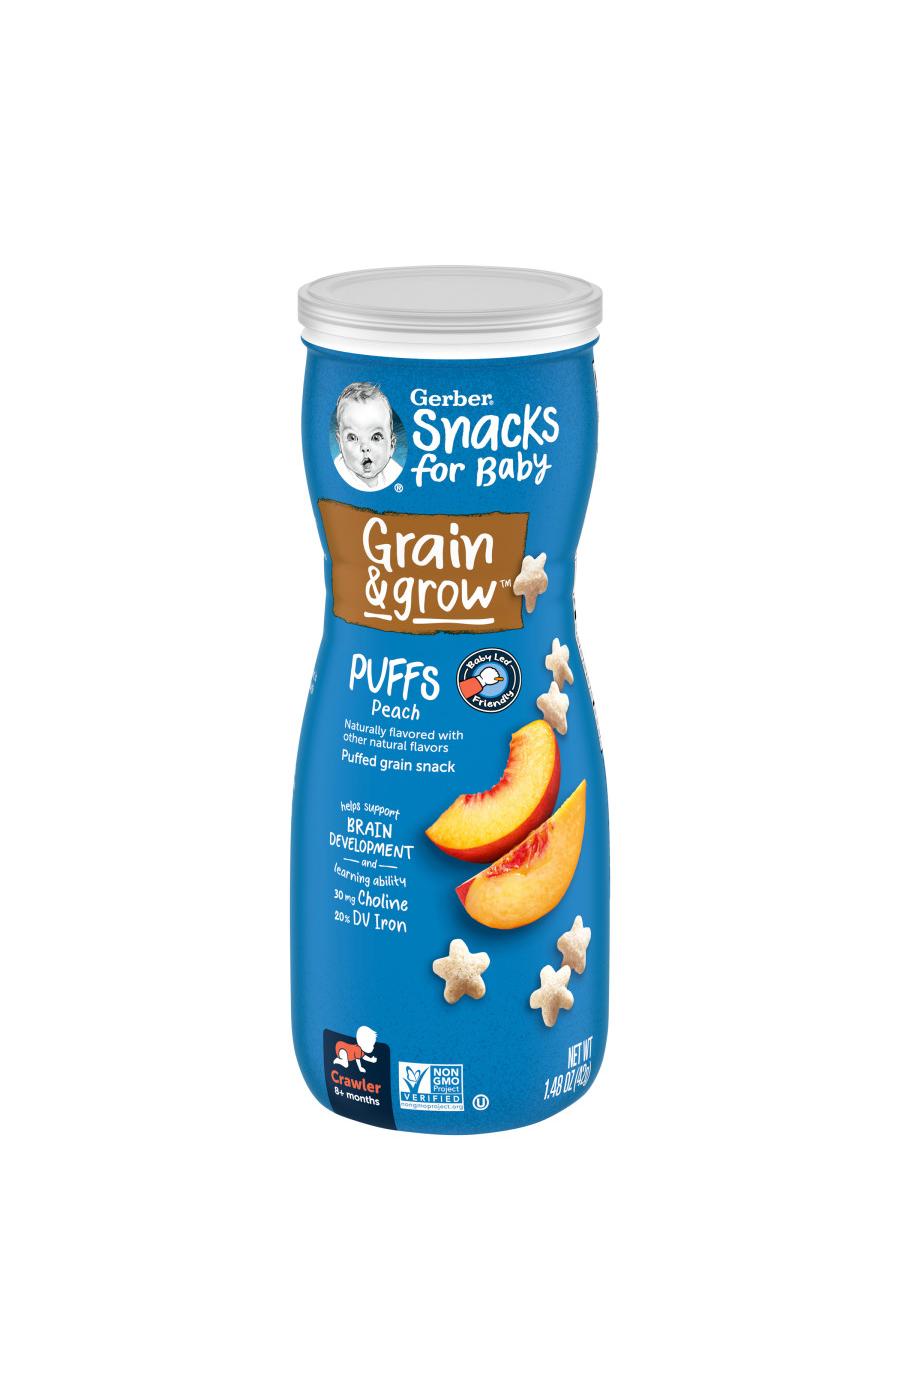 Gerber Snacks for Baby Grain & Grow Puffs - Peach; image 1 of 8